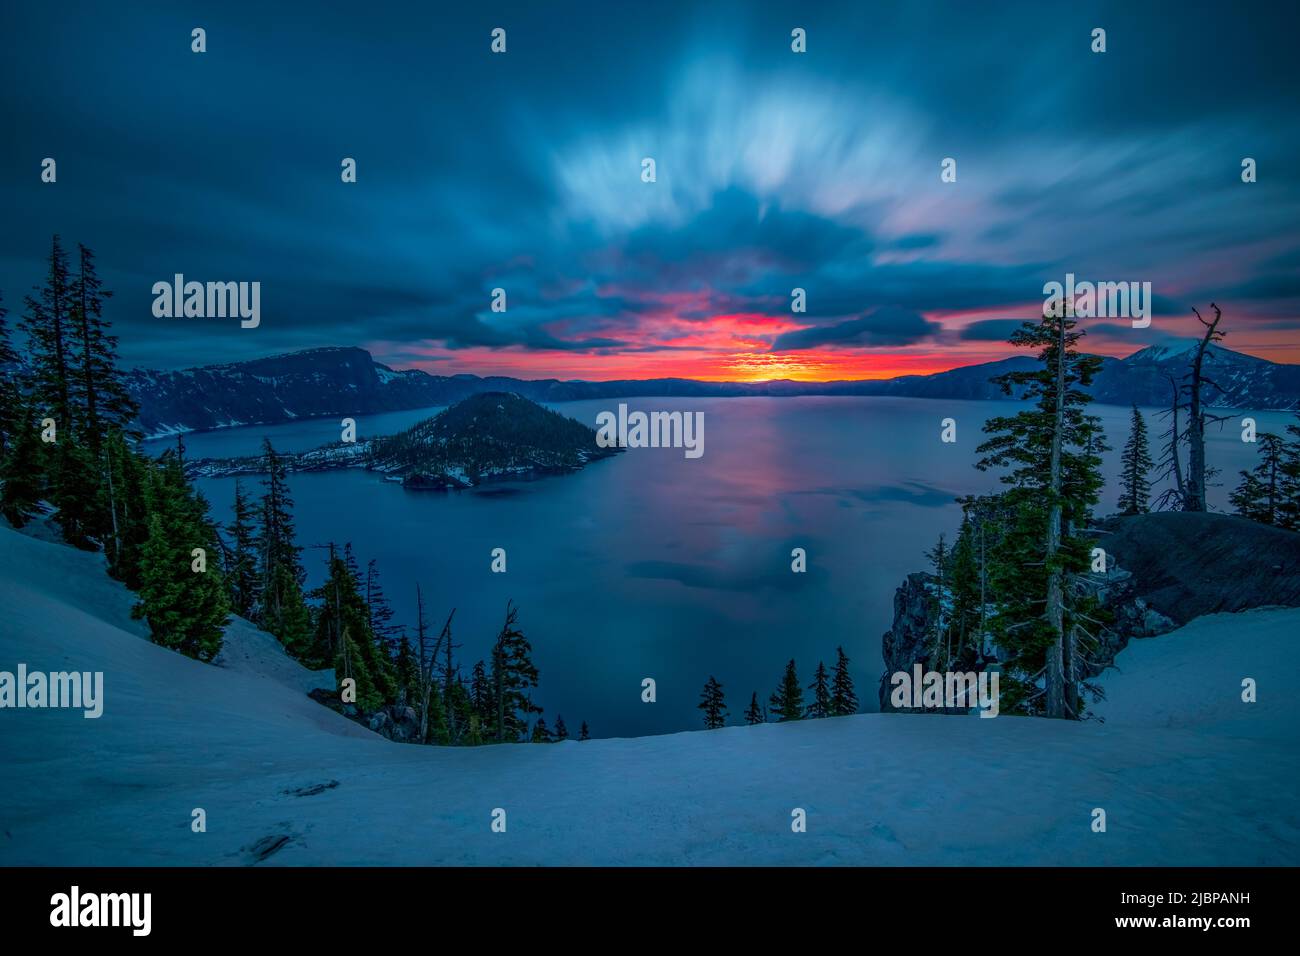 North America, USA, American, Pacific Northwest, Cascade Mountains, Oregon, Crater Lake, National Park, Stock Photo